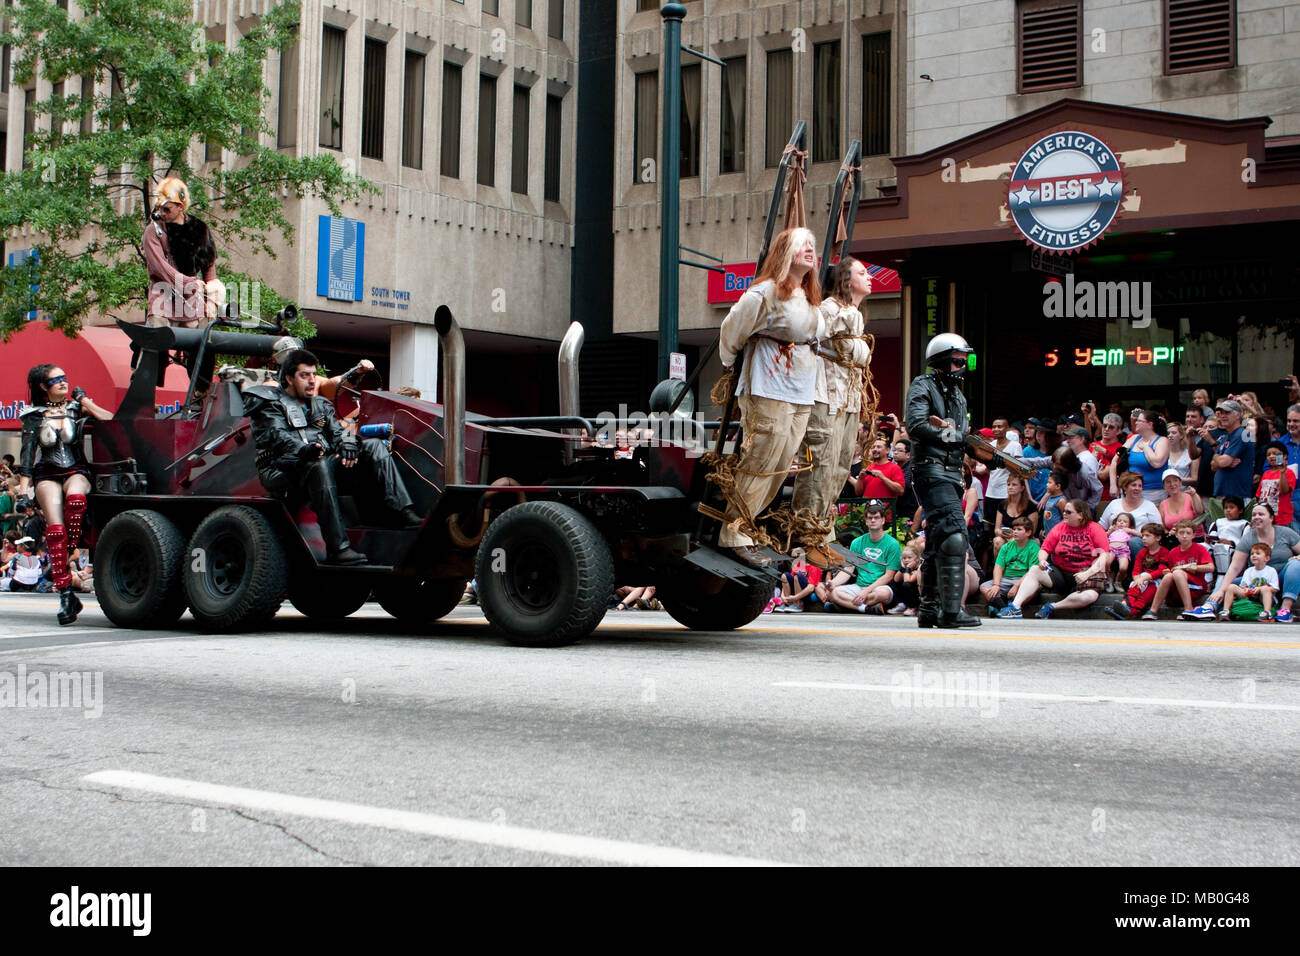 A vehicle from the Road Warrior movie, with human shields out front, terrorizes the crowd at the Dragon Con parade on August 31, 2013 in Atlanta, GA. Stock Photo